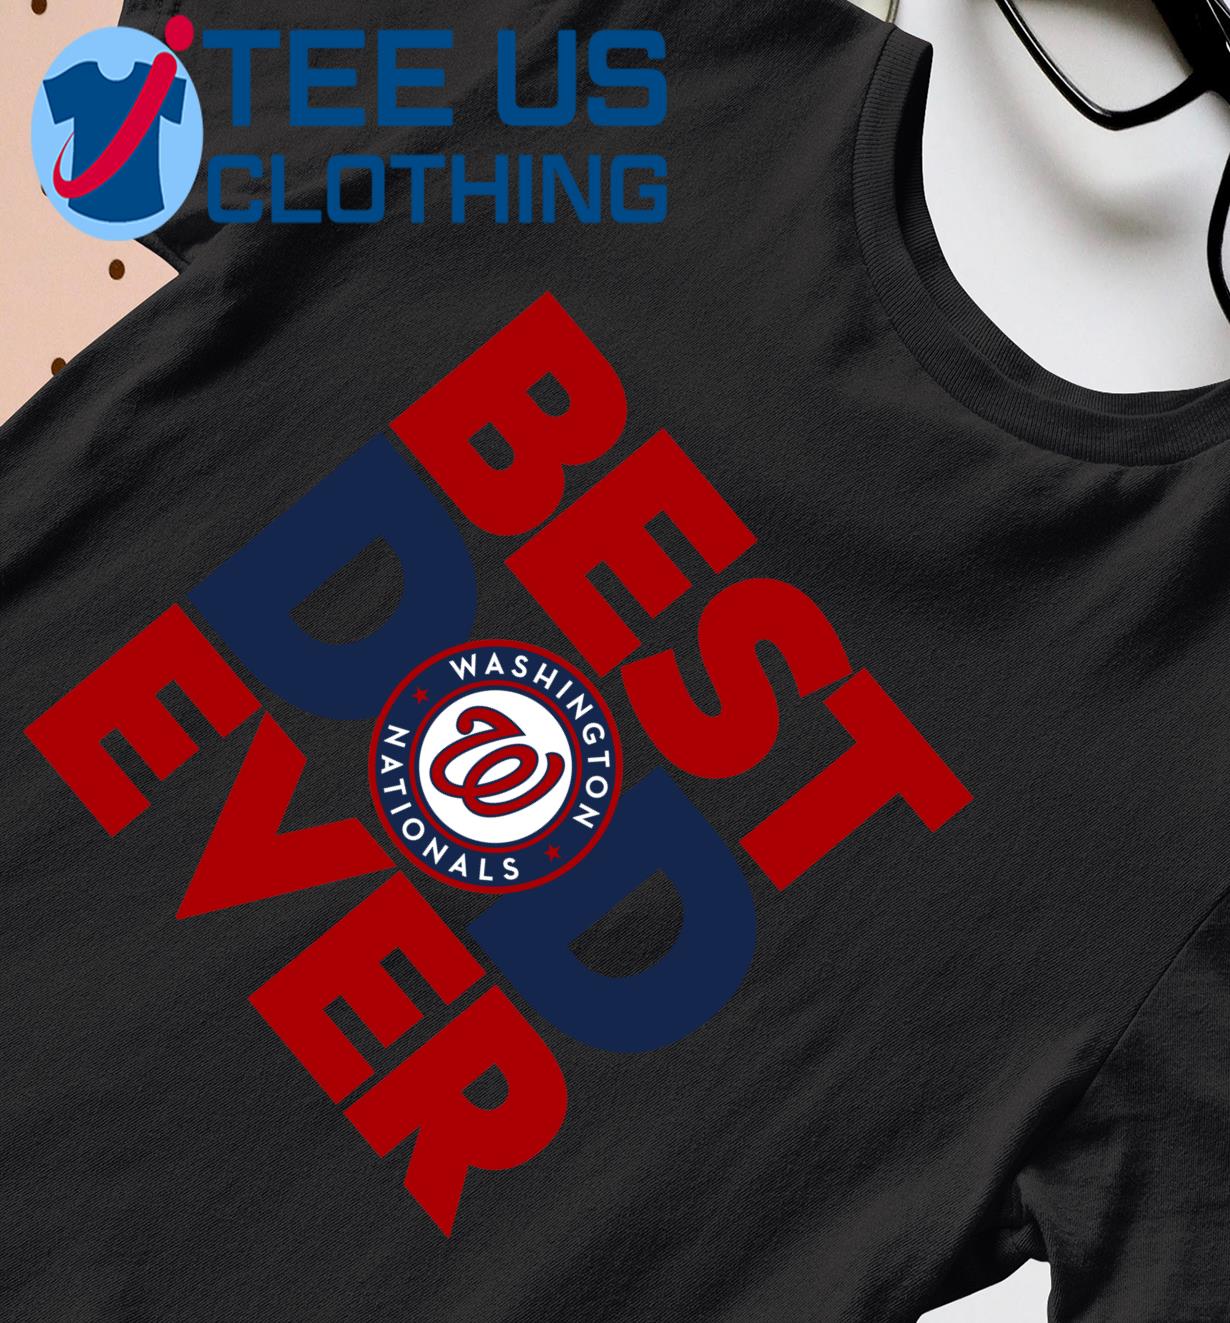 MLB Chicago Cubs best dad ever shirt, hoodie, sweater, long sleeve and tank  top